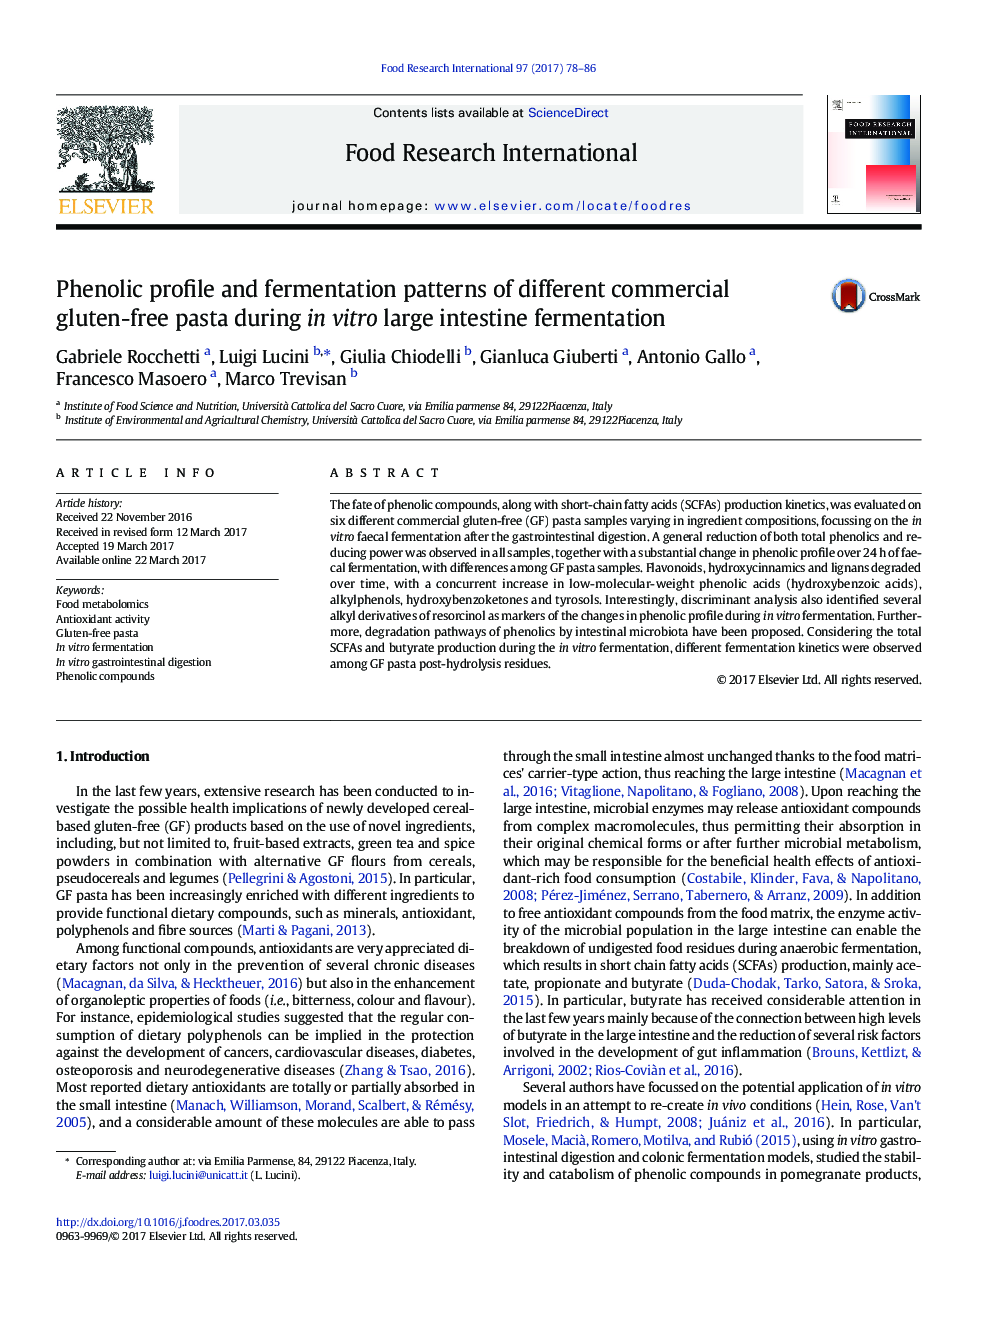 Phenolic profile and fermentation patterns of different commercial gluten-free pasta during in vitro large intestine fermentation